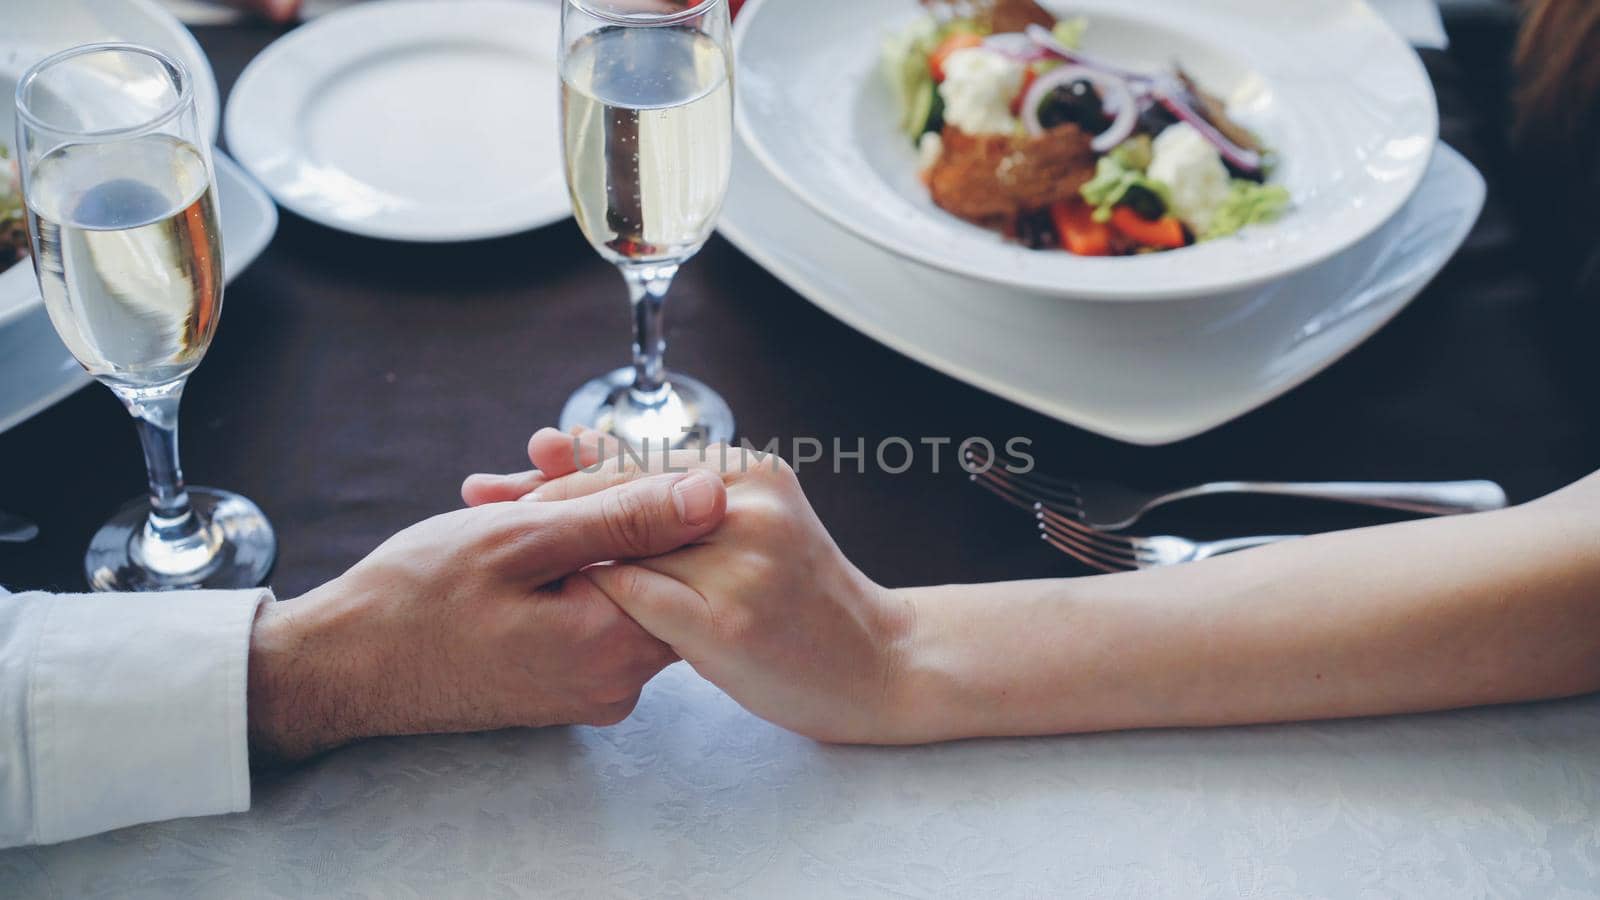 Close-up shot of young lovers touching and holding hands at romantic dinner in classy restaurant. Table with sparking champagne glasses, flatware and food in background.